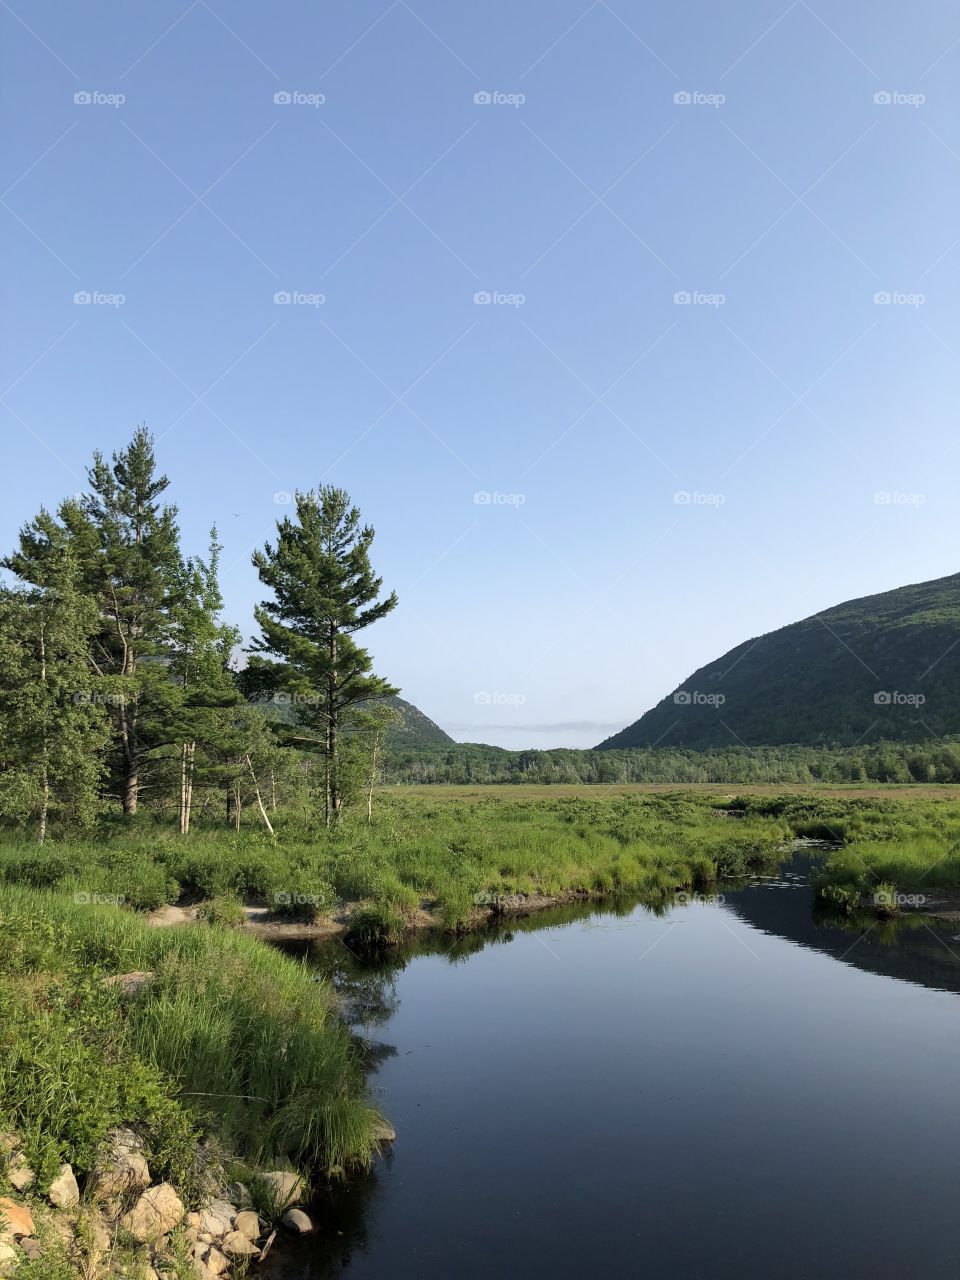 Scenic landscape of green grass and trees surrounding a lake or river in a valley situated between hills and mountains in Acadia National Park in Bar Harbor, Maine USA 